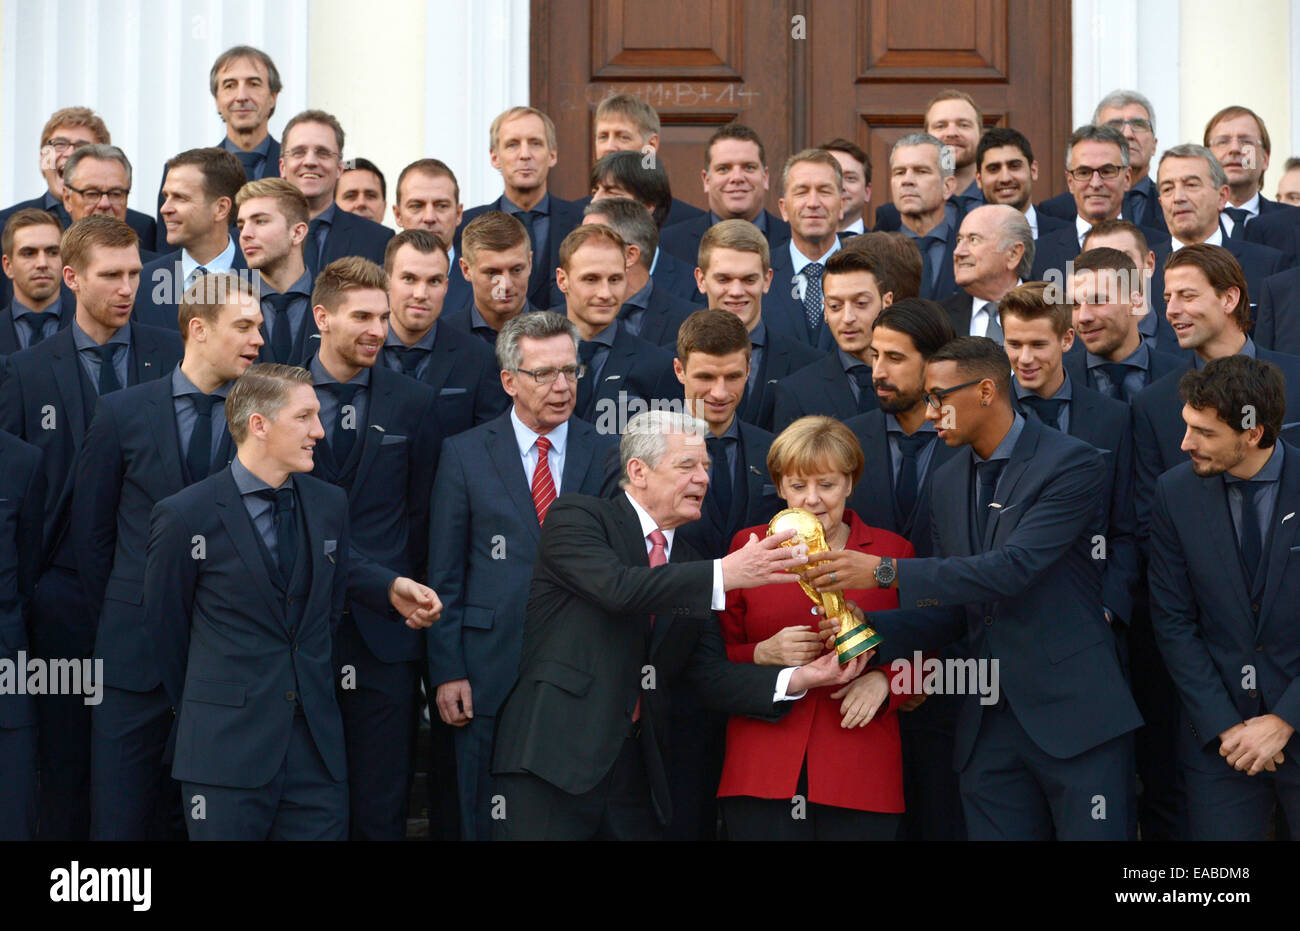 Berlin, Germany. 10th Nov, 2014. German President Joachim Gauck, Chancellor Angela Merkel, and Minister of the Interior Thomas de Maziere stand together with the 23 soccer world champions in front of Bellevue Castle in Berlin, Germany, 10 November 2014. The German soccer national team is honored with the award 'Silbernes Lorbeerblatt' for winning the 2014 world cup in Brazil. PHOTO: RAINER JENSEN/dpa/Alamy Live News Stock Photo